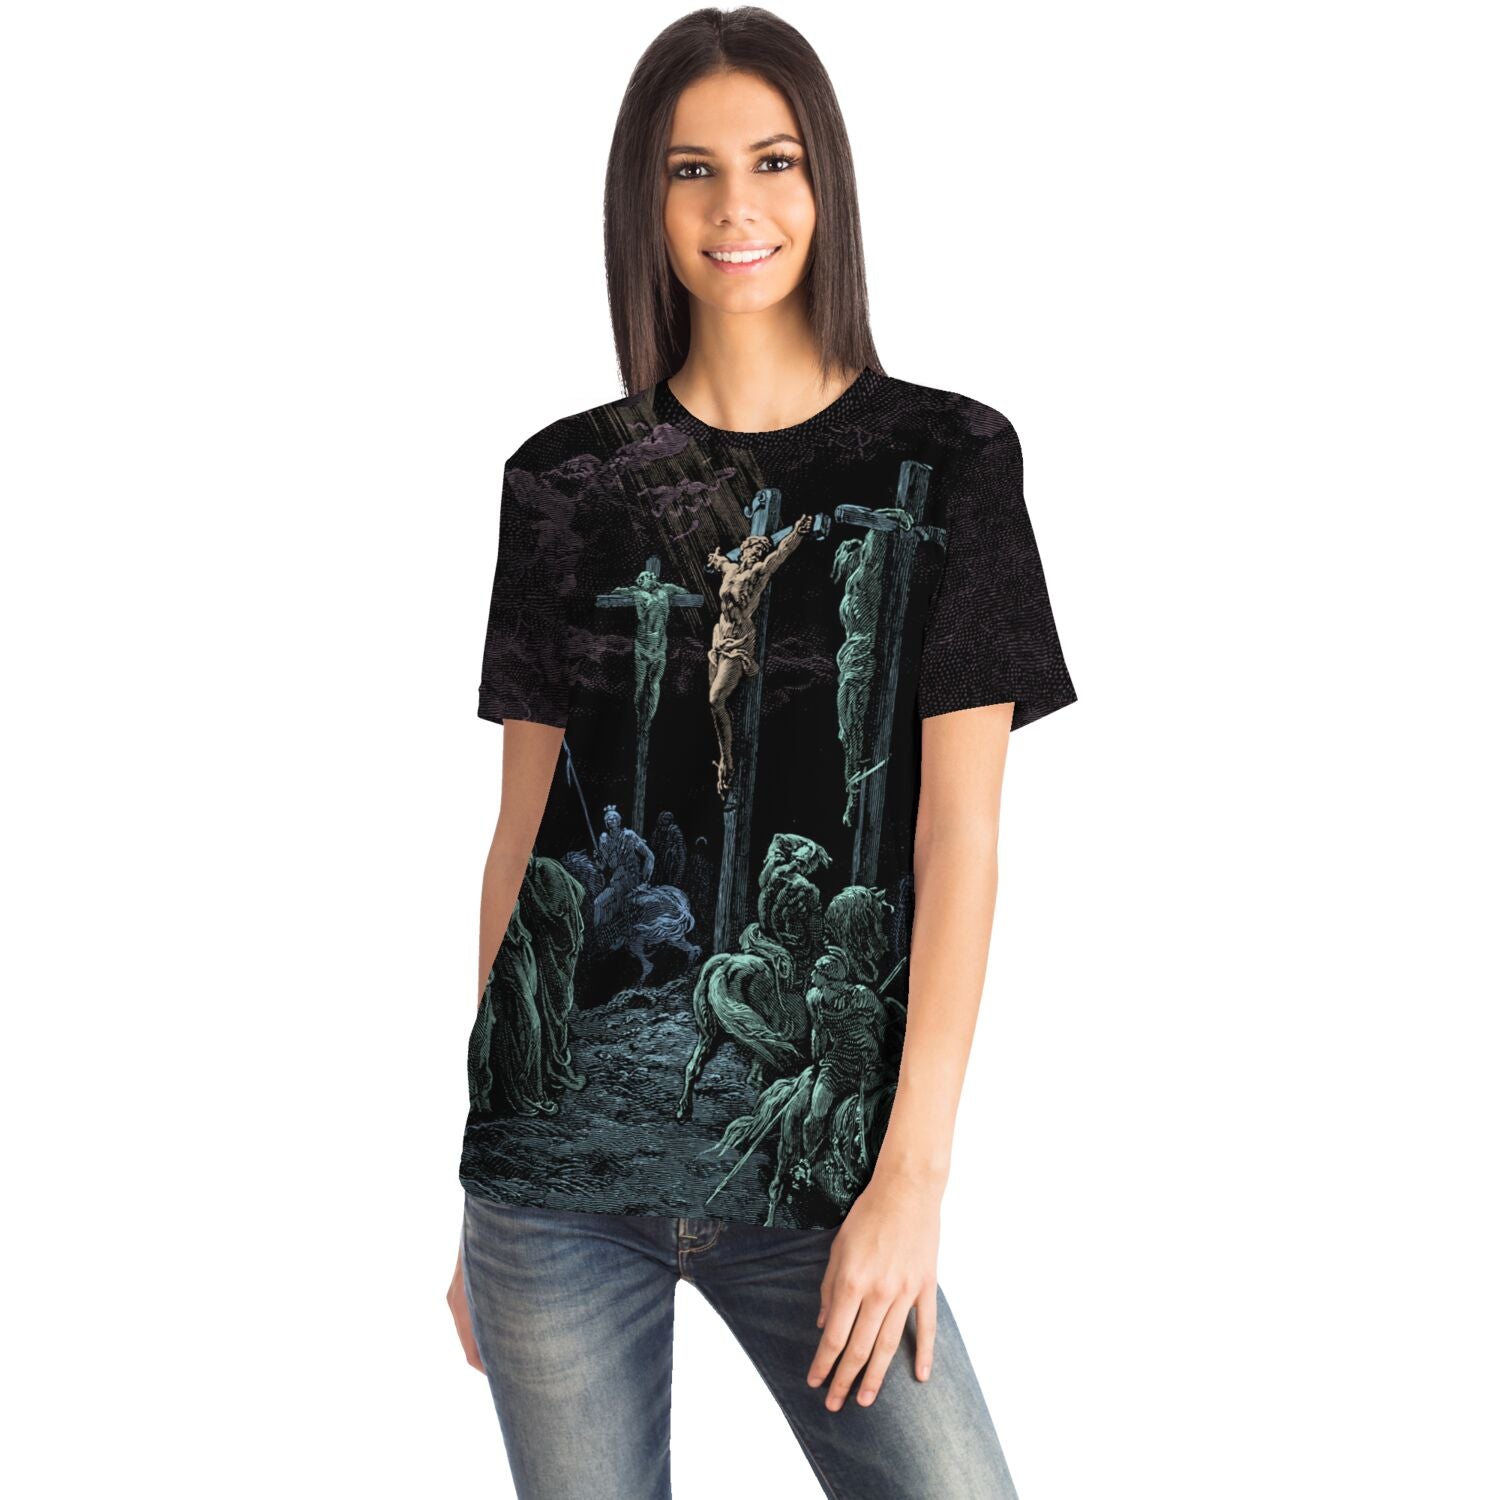 T-shirt The Crucifixion of Christ by Gustave Dore, Paradise Lost, Dante, Surreal Spiritual Graphic Art T-Shirt